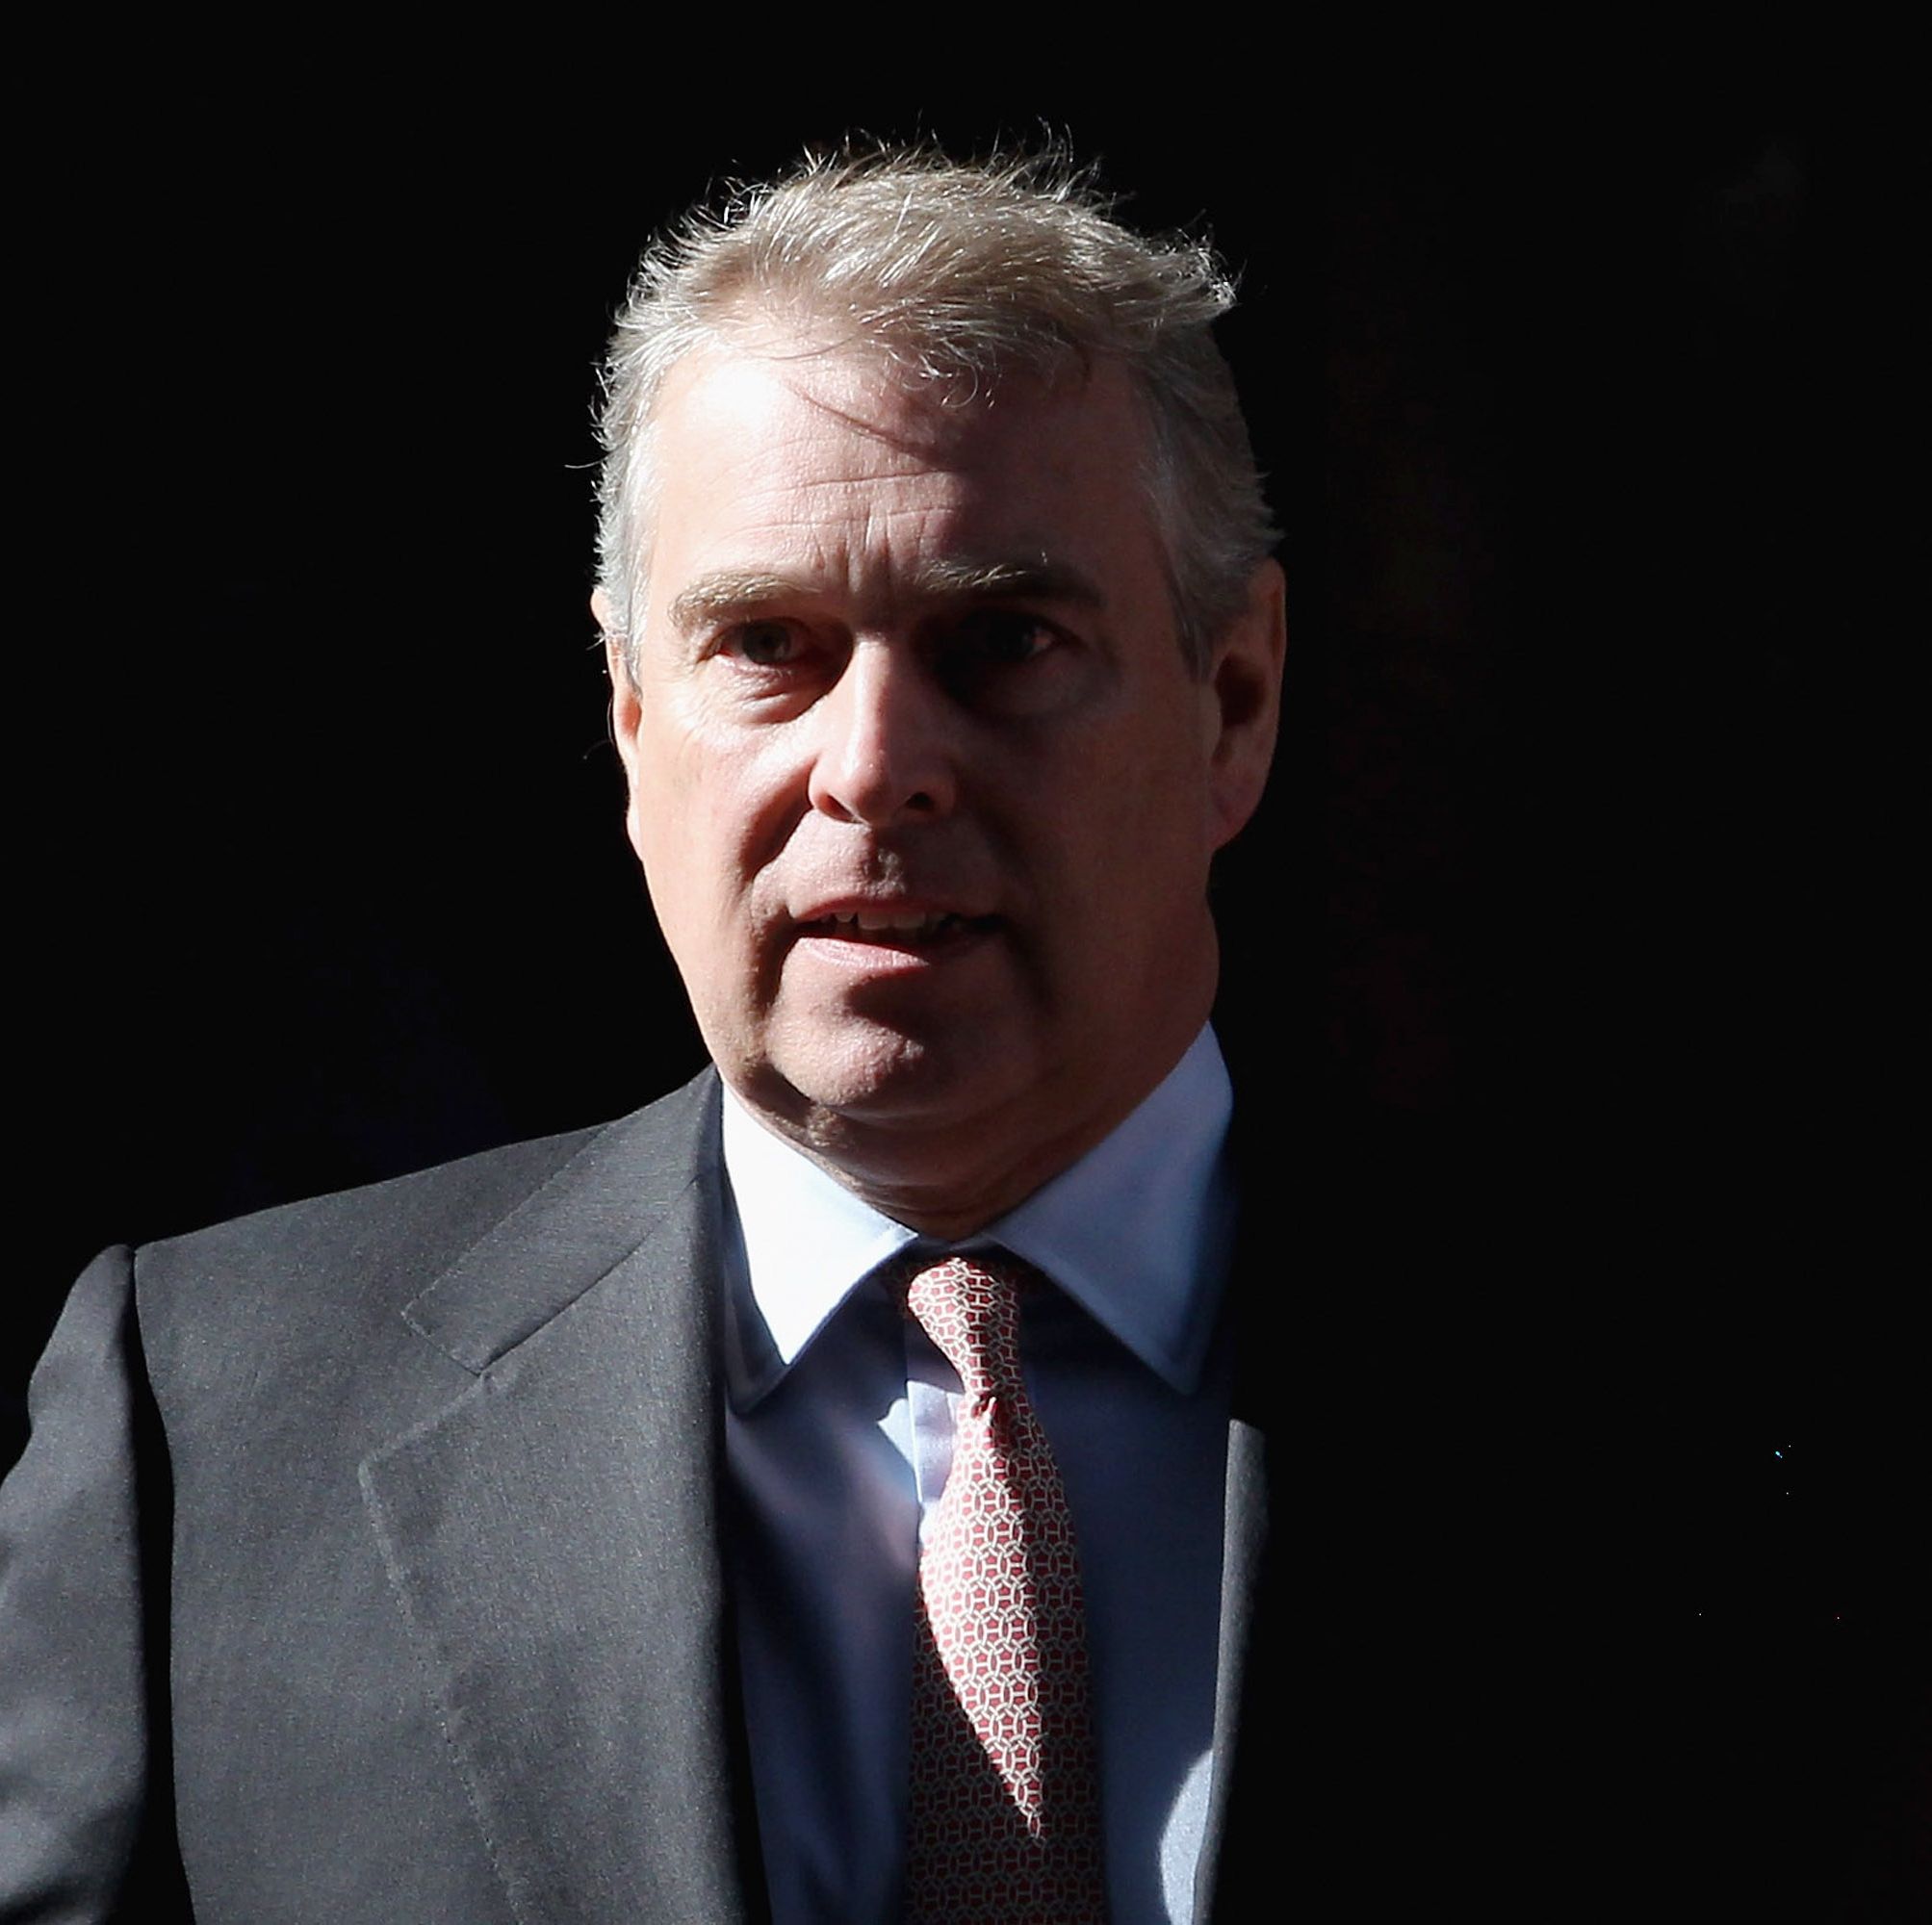 Prince Andrew's Accuser is Not Interested in a 